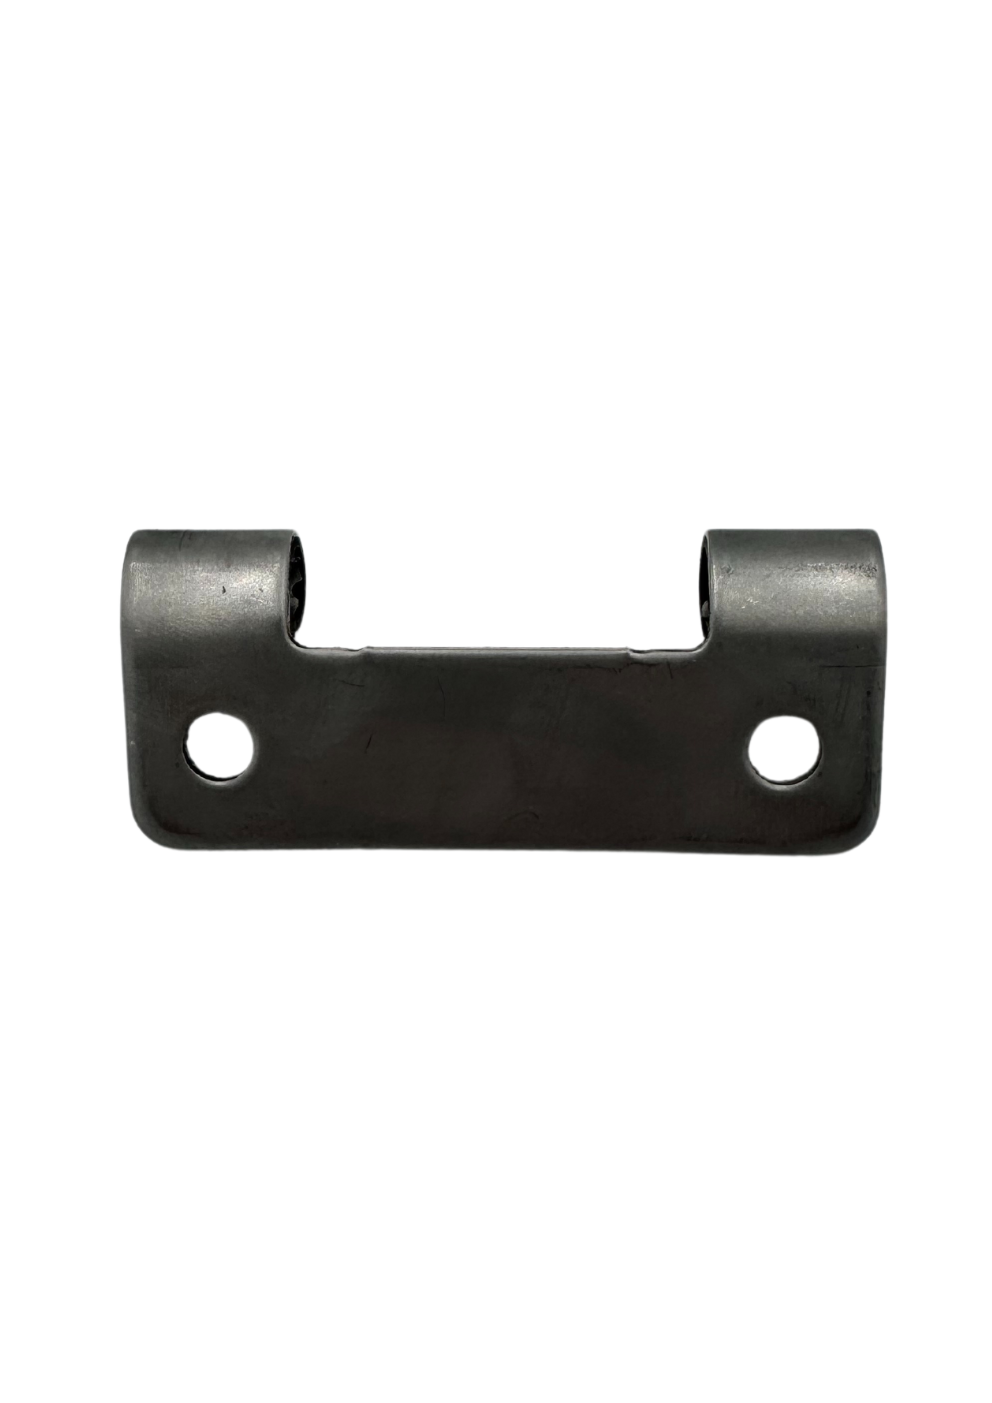 (93-7689) Hinge Upper Thermo King Advancer A-500